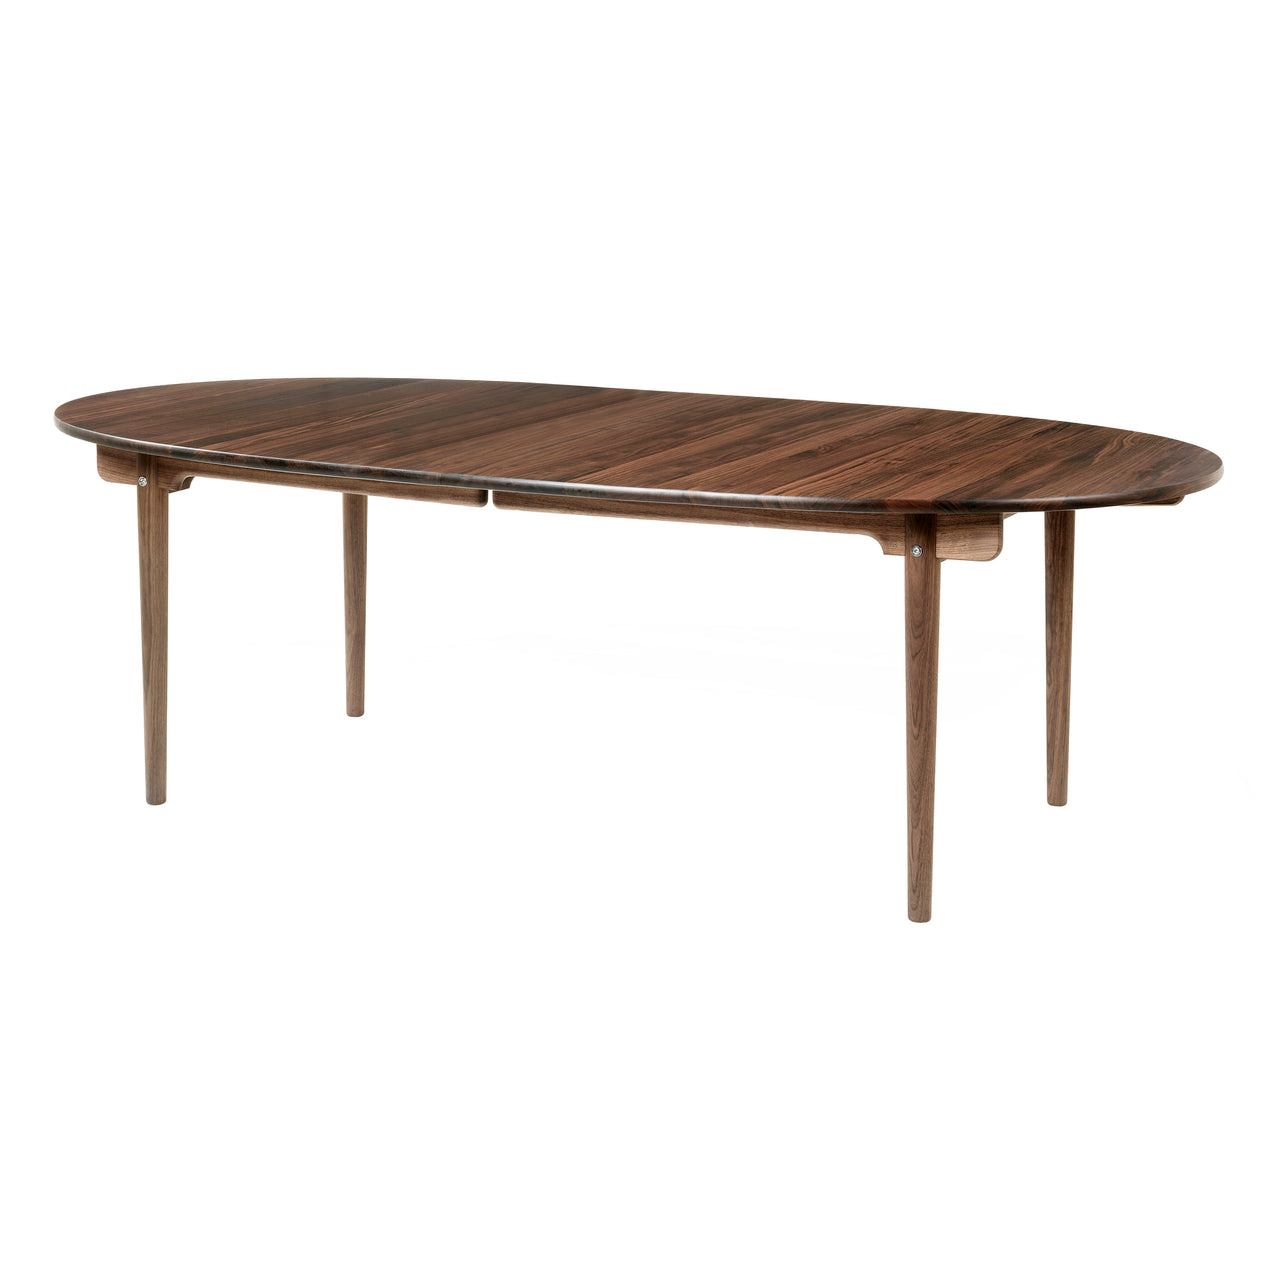 CH339 Dining Table: Oiled Walnut